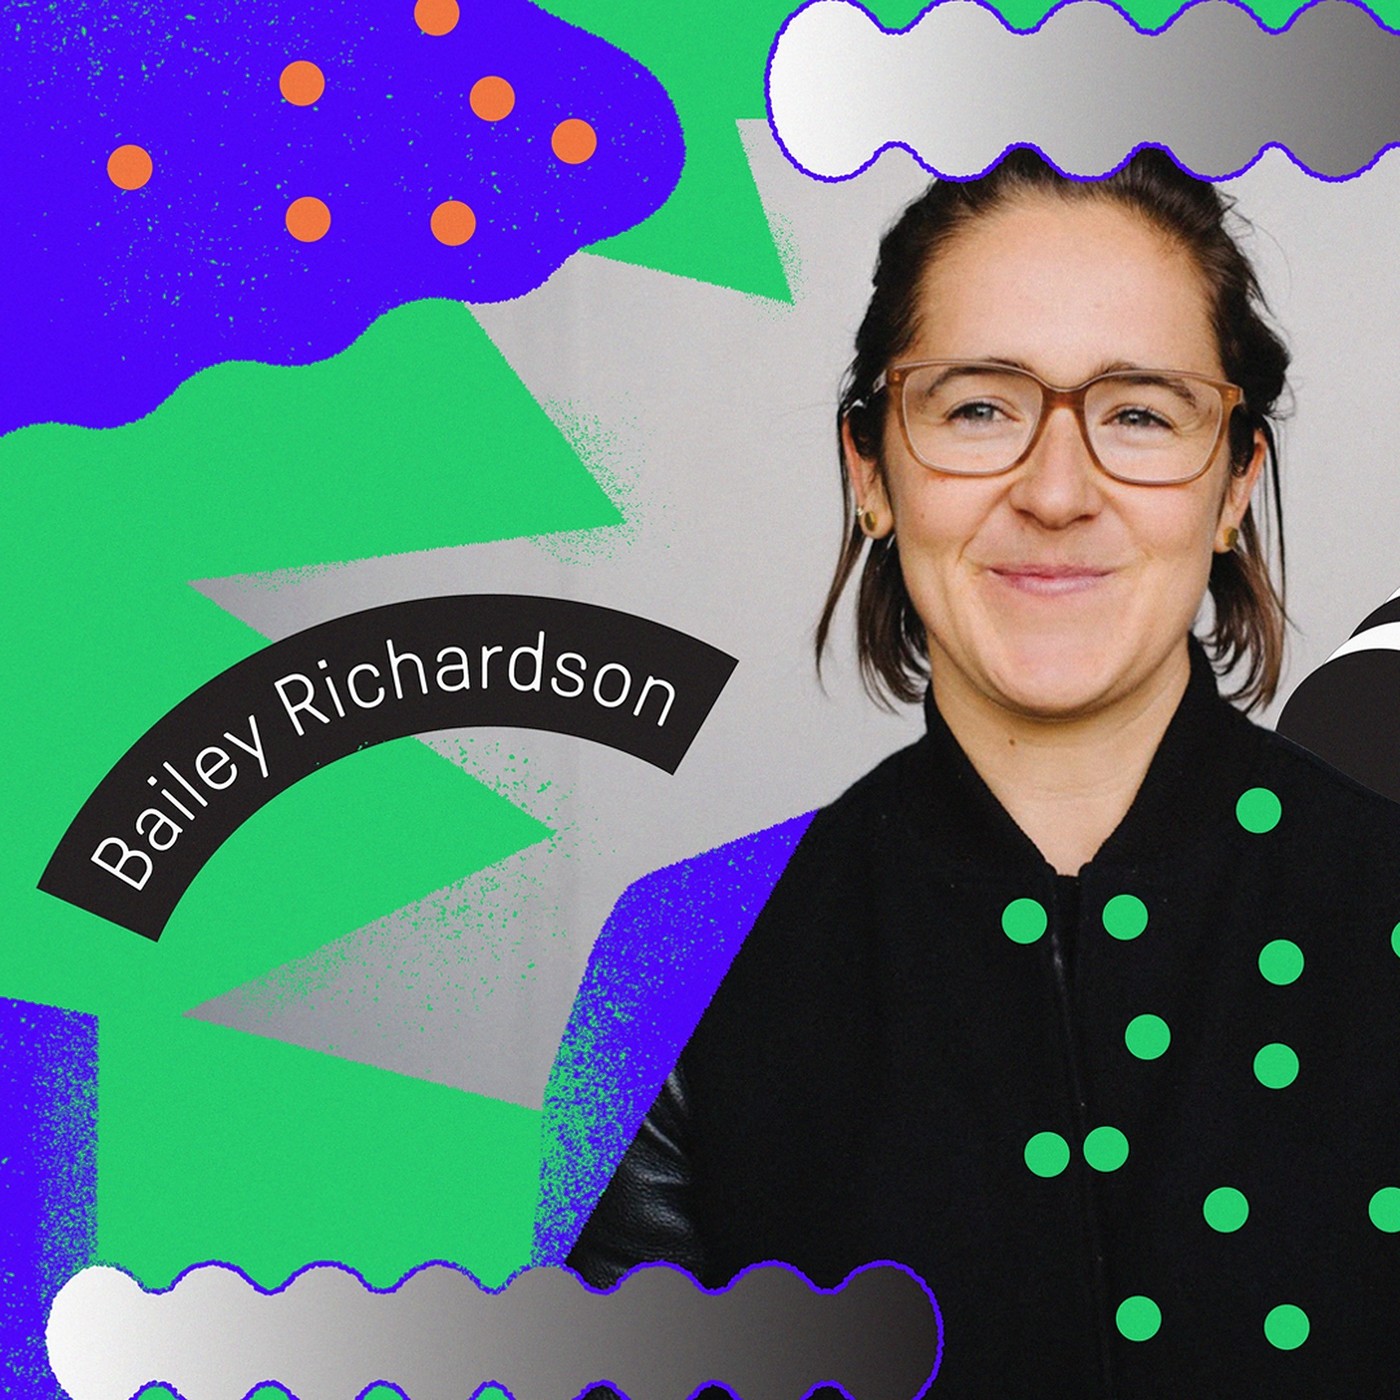 People & Company’s Bailey Richardson on how to find your people